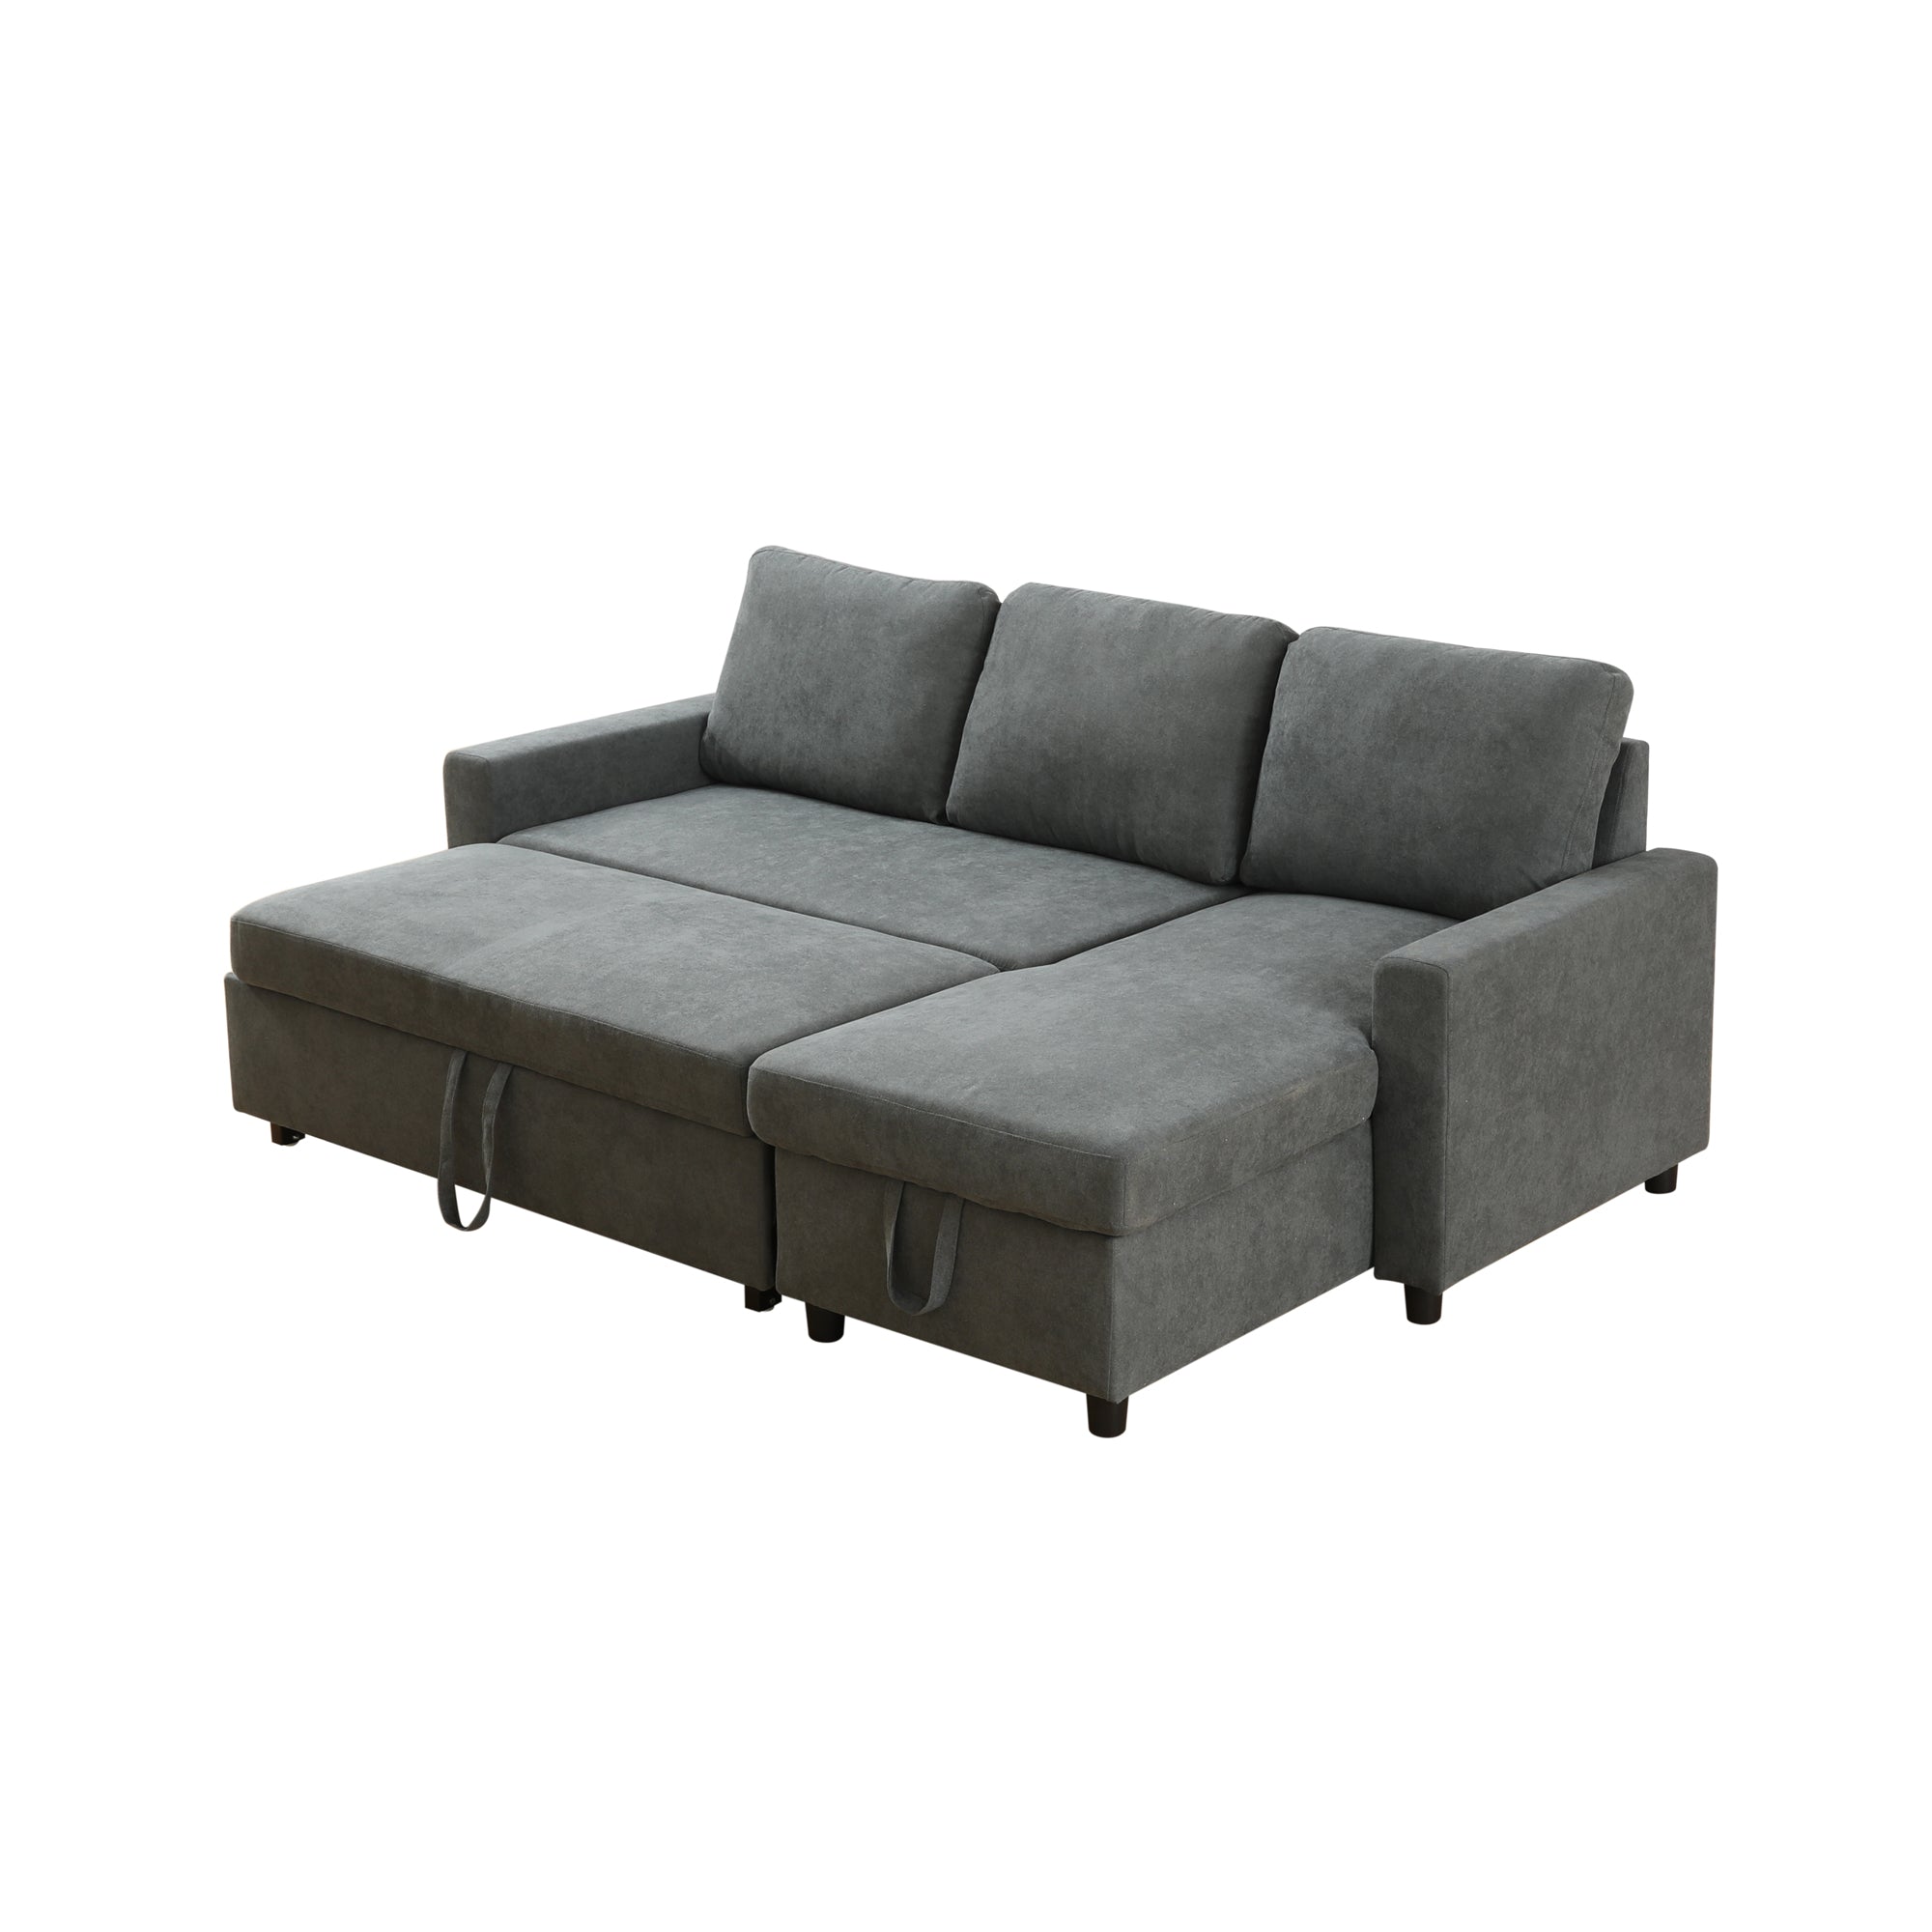 Ainehome Dark Grey Flannelette L-Shaped Sofa bed